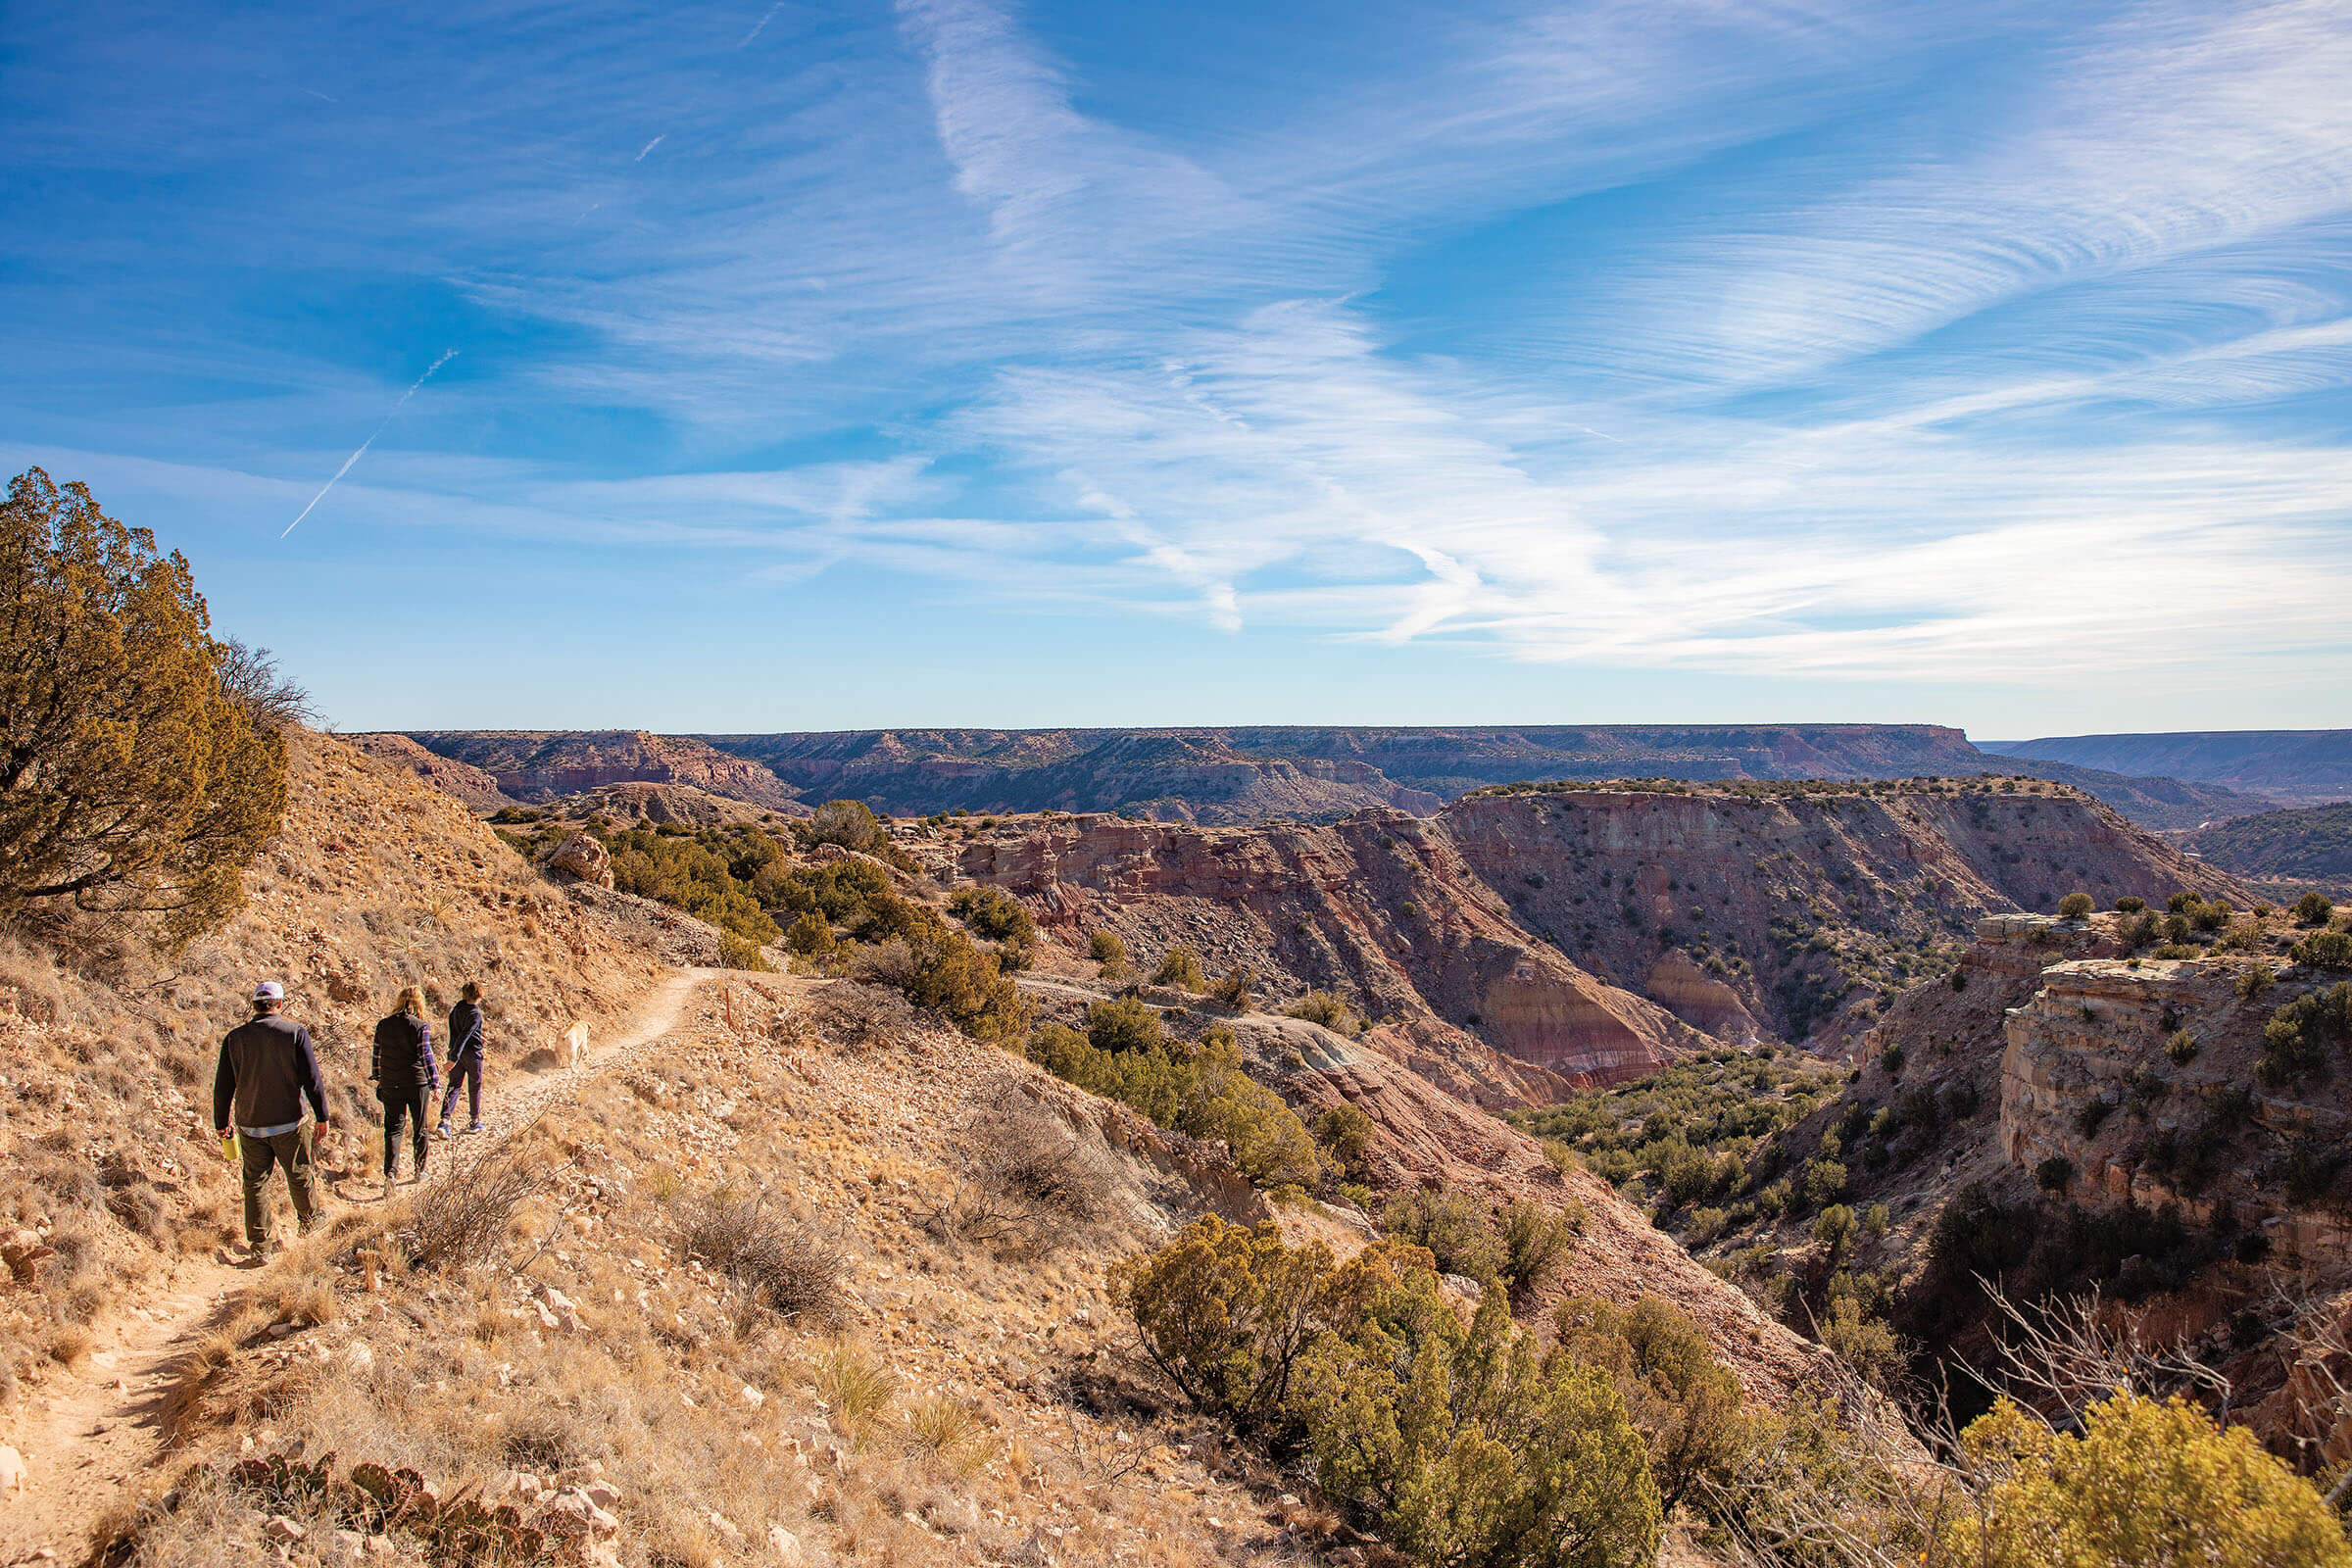 A wide view of a small group of hikers on a dirt trail among canyons under blue sky